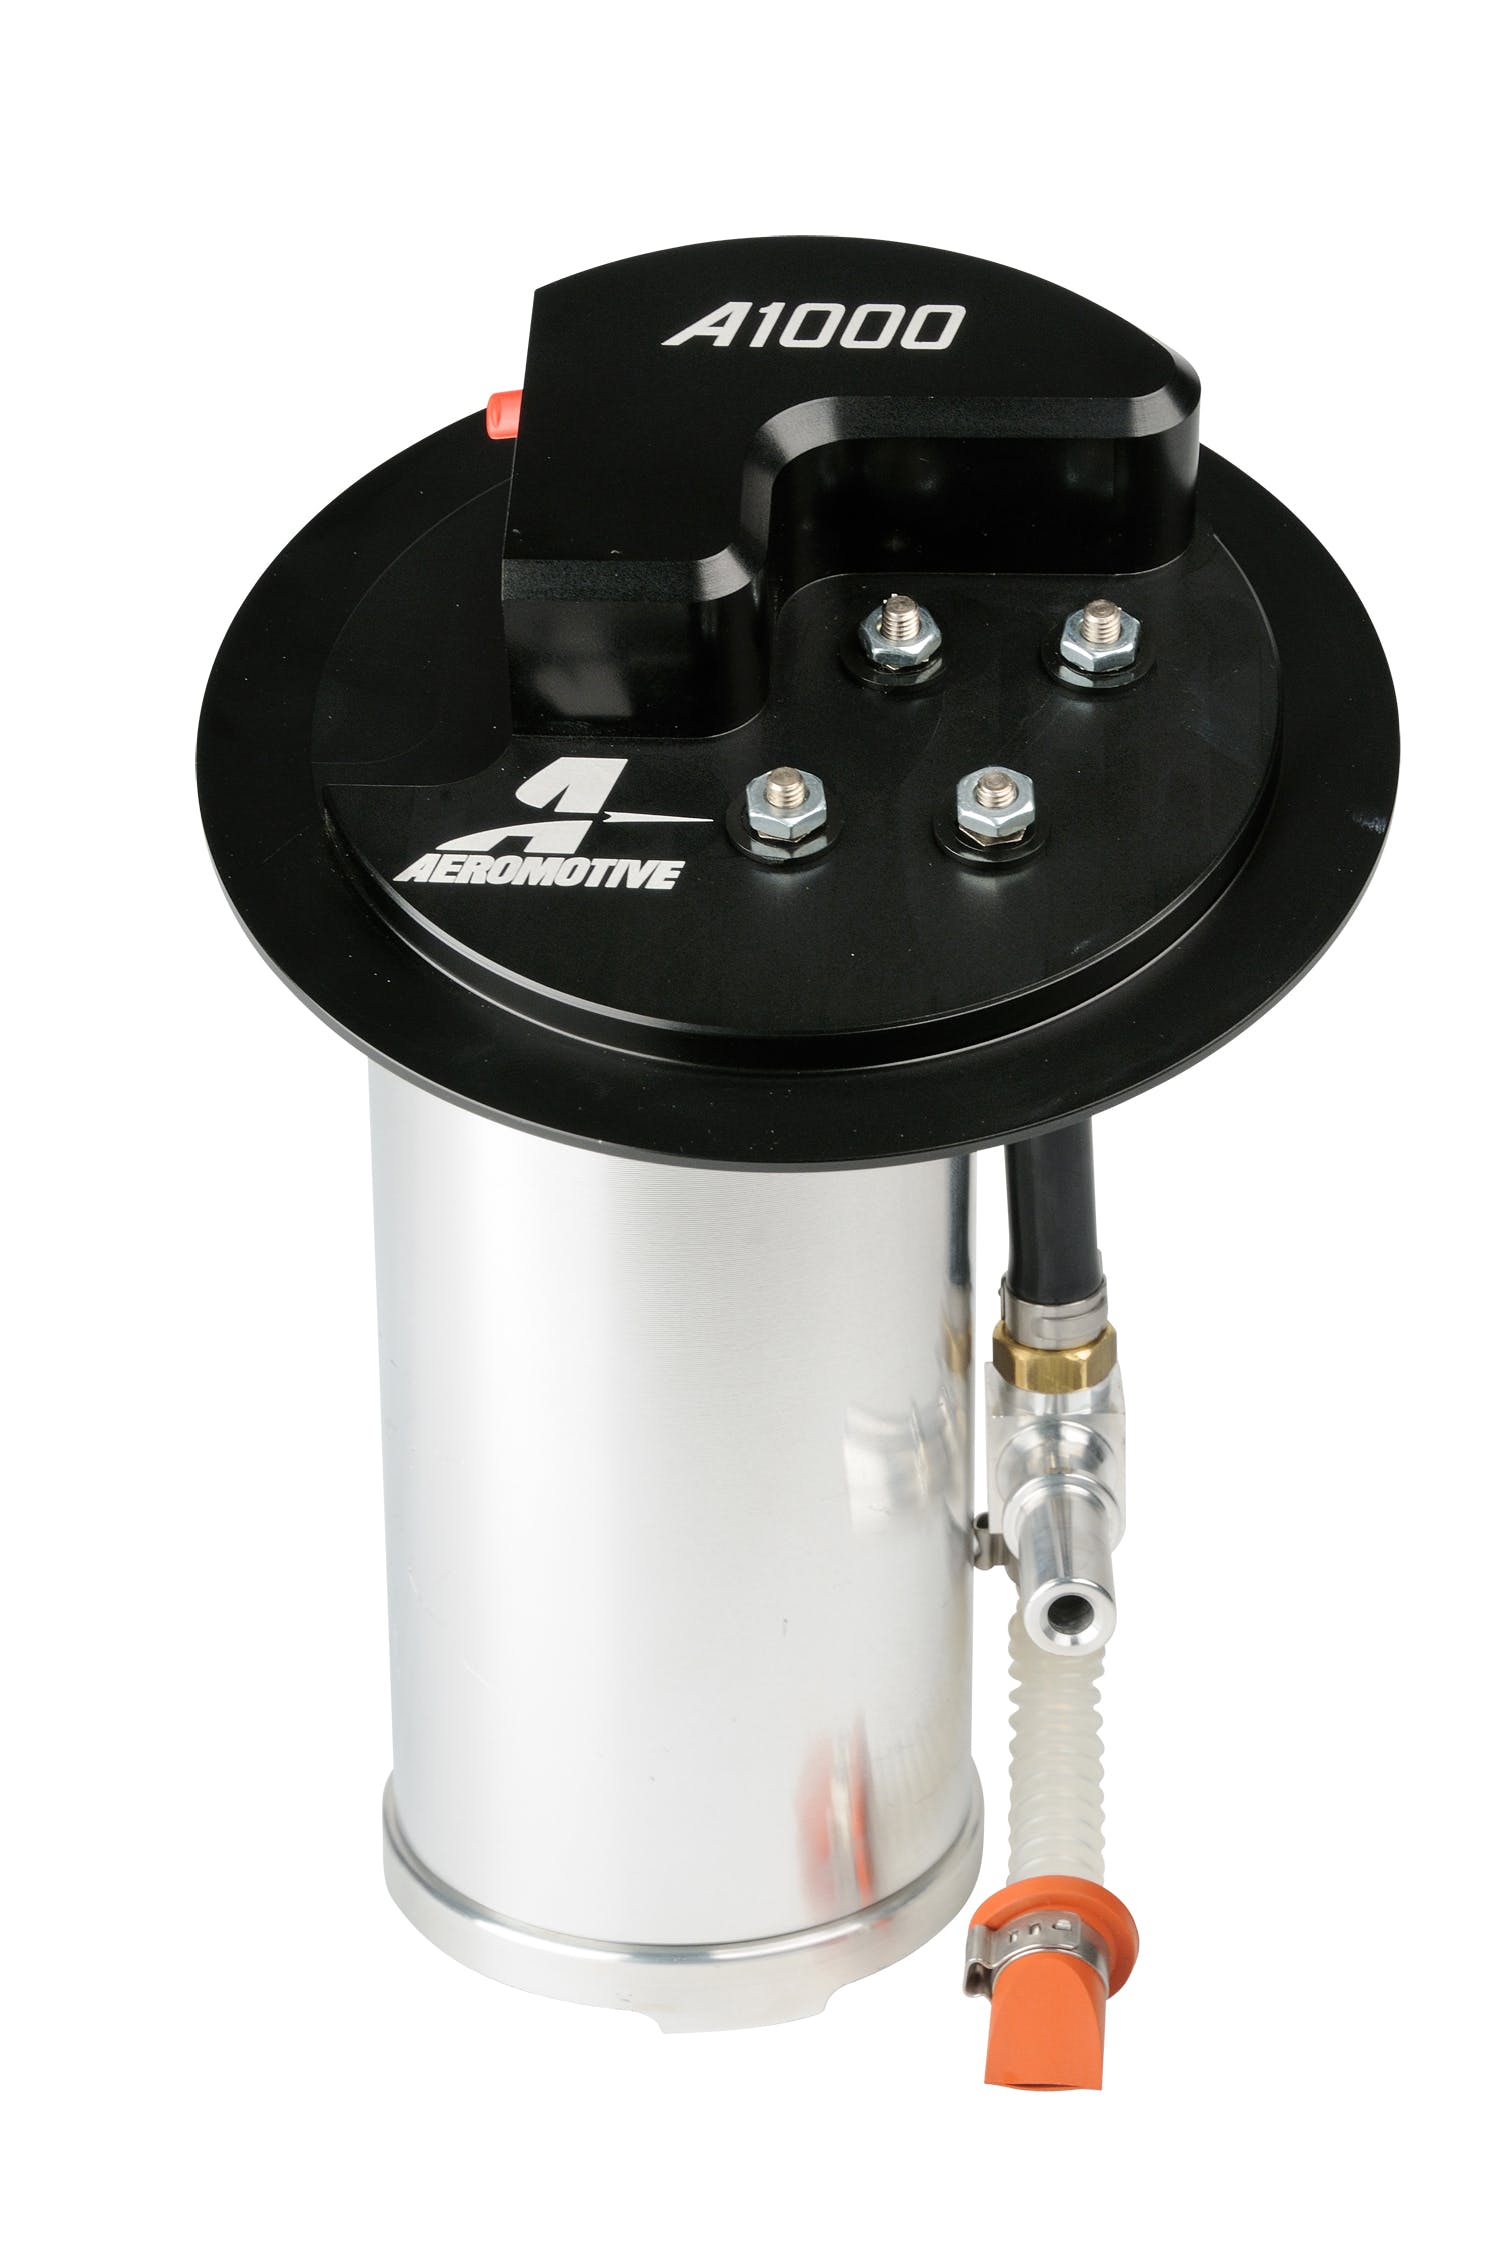 Aeromotive Fuel System 18694 Fuel Pump, Ford, 2010-2013 Mustang, A1000